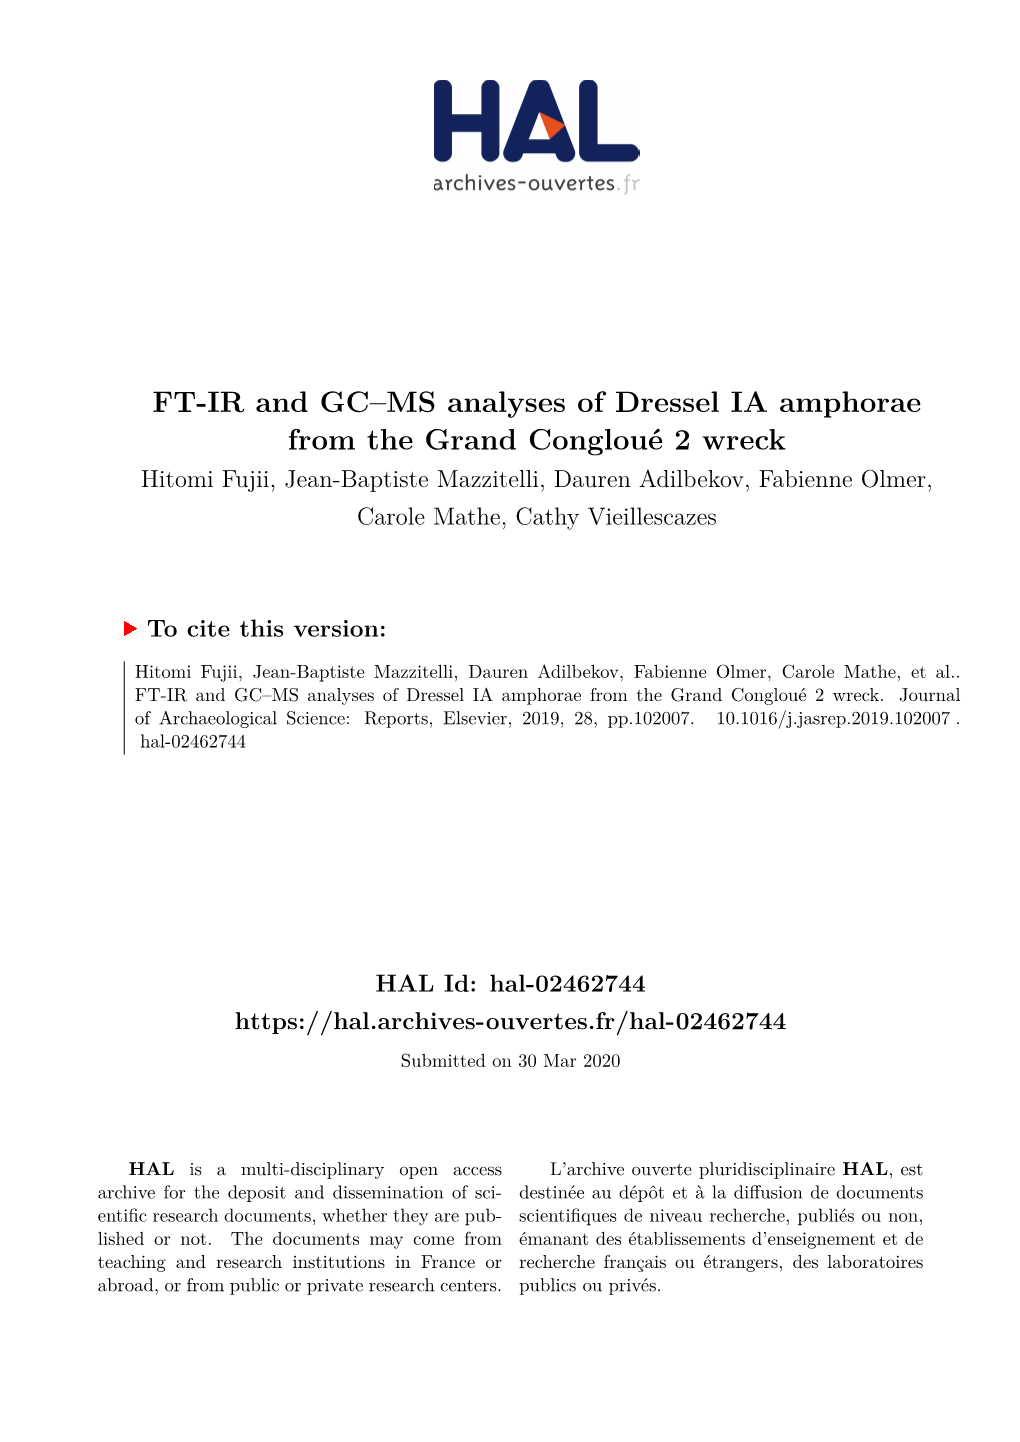 FT-IR and GC–MS Analyses of Dressel IA Amphorae from the Grand Congloué 2 Wreck